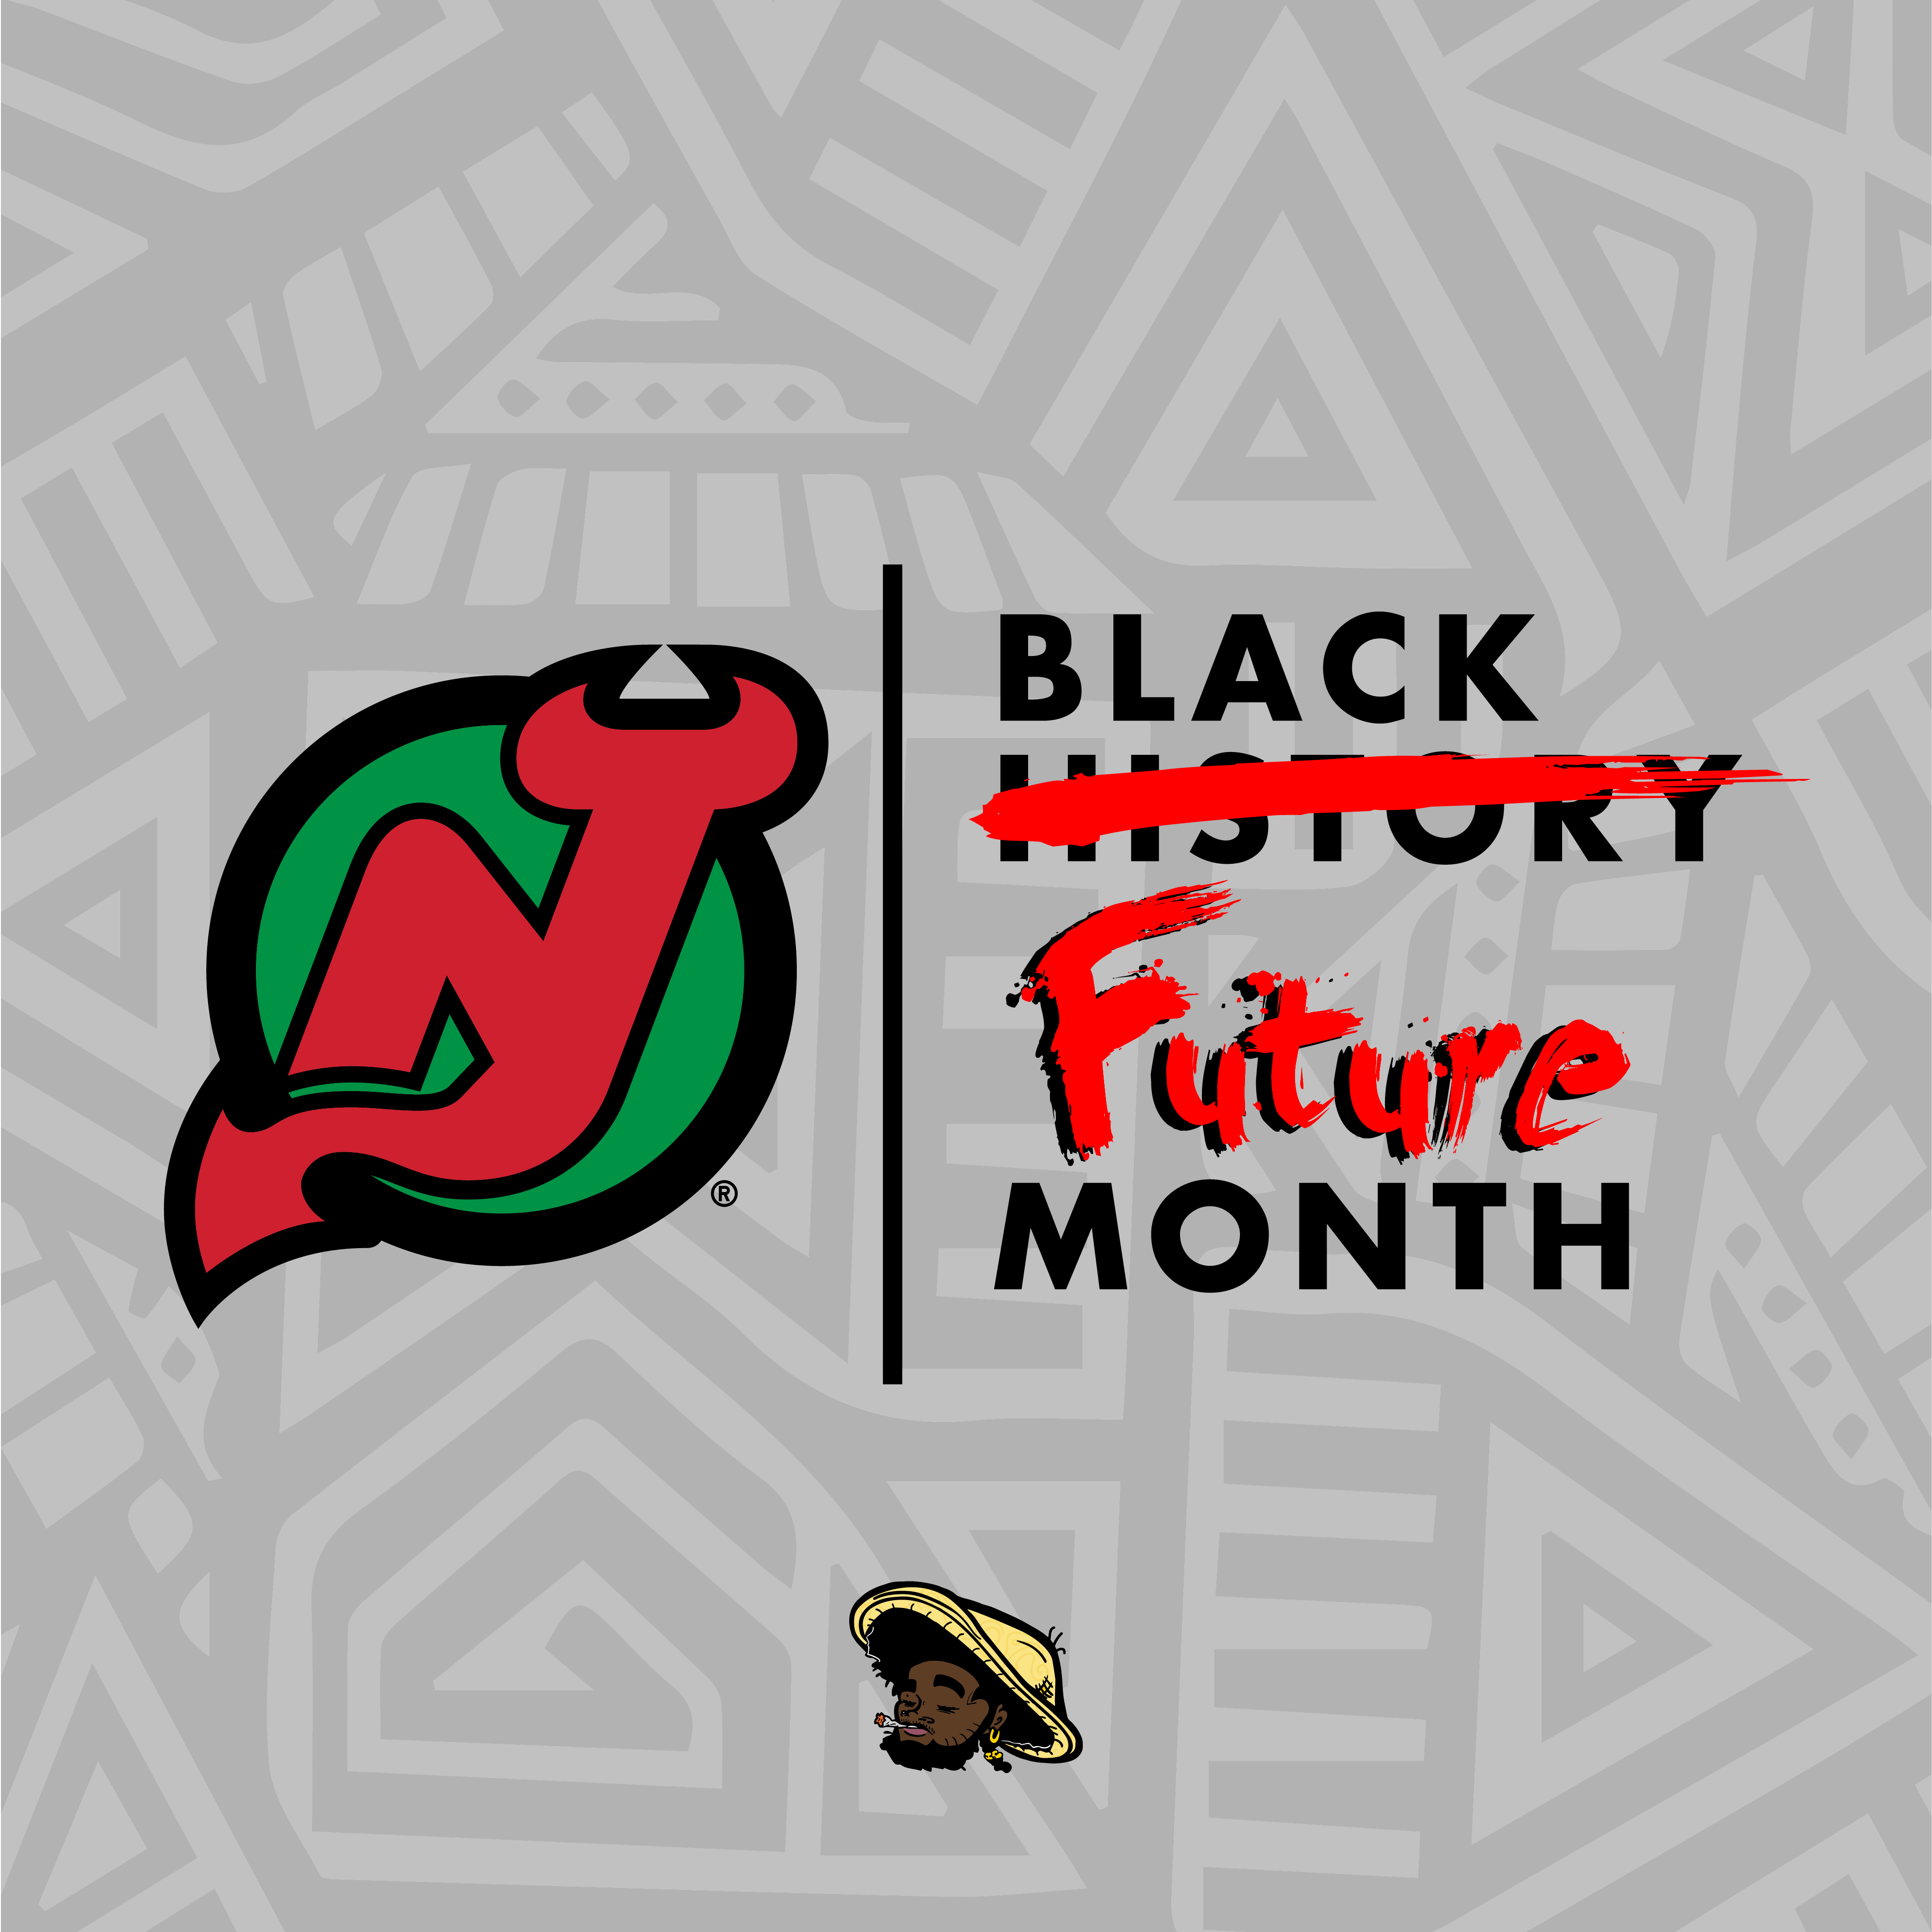 NEW JERSEY DEVILS x BLACK HISTORY MONTH CAMPAIGN